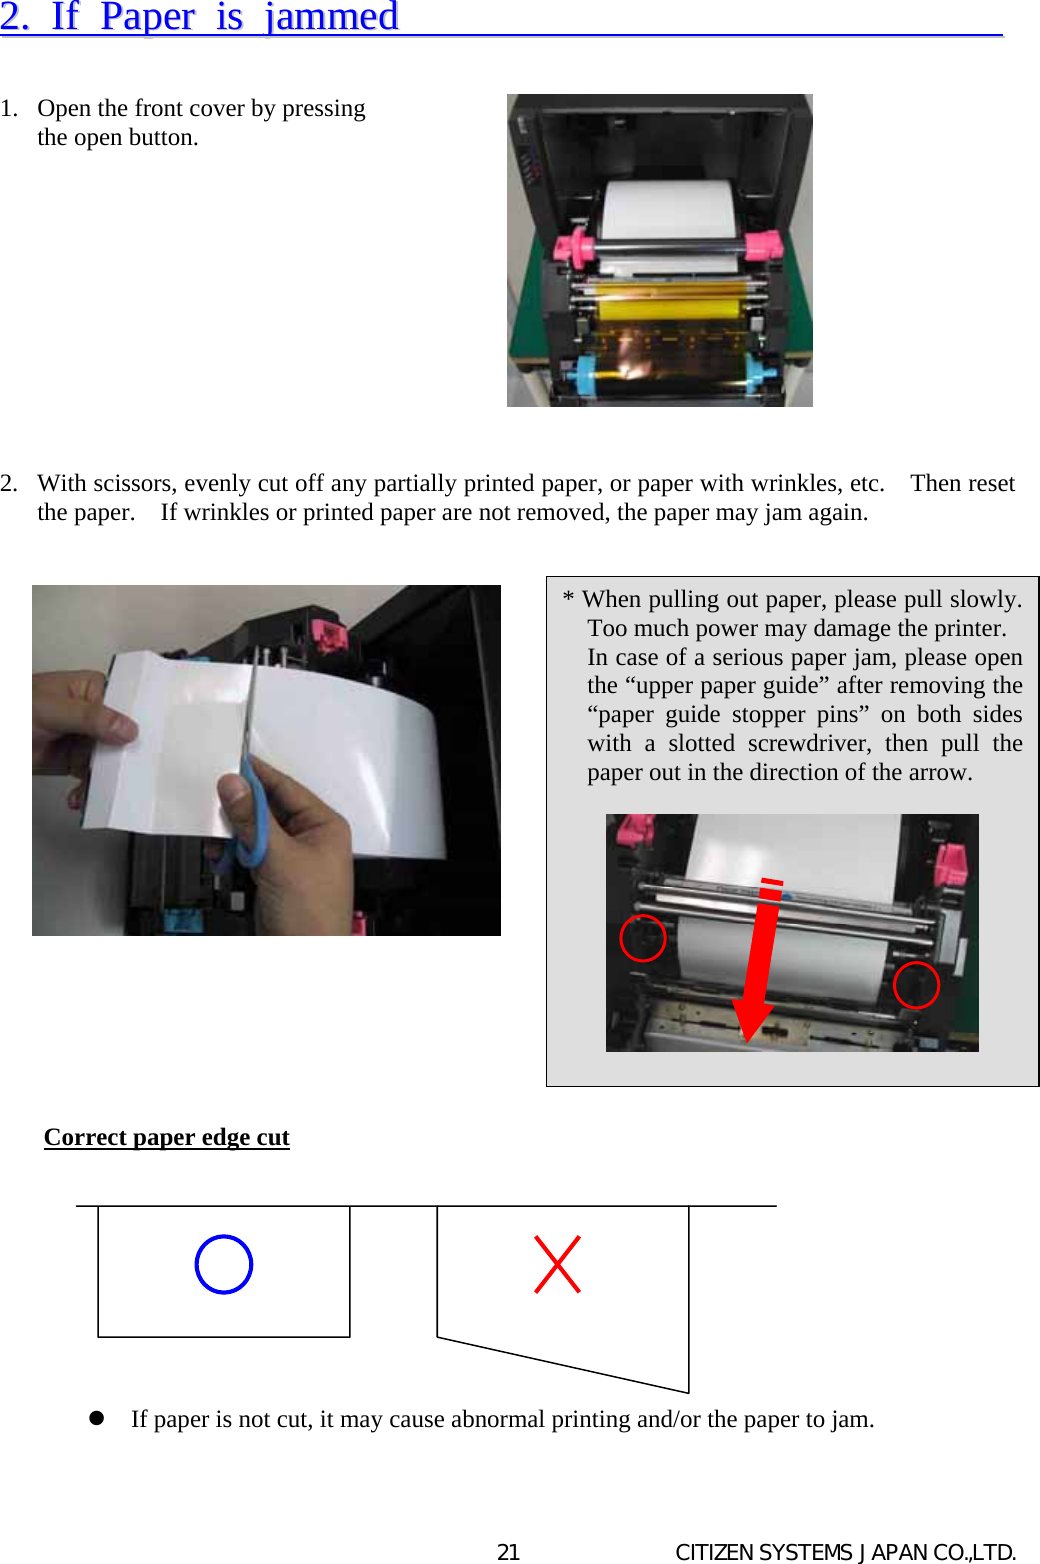   CITIZEN SYSTEMS JAPAN CO.,LTD. 2122..  IIff  PPaappeerr  iiss  jjaammmmeedd                                      1.  Open the front cover by pressing   the open button.            2.  With scissors, evenly cut off any partially printed paper, or paper with wrinkles, etc.    Then reset the paper.    If wrinkles or printed paper are not removed, the paper may jam again.                        Correct paper edge cut            If paper is not cut, it may cause abnormal printing and/or the paper to jam.   * When pulling out paper, please pull slowly. Too much power may damage the printer.  In case of a serious paper jam, please open the “upper paper guide” after removing the “paper guide stopper pins” on both sides with a slotted screwdriver, then pull the paper out in the direction of the arrow.    